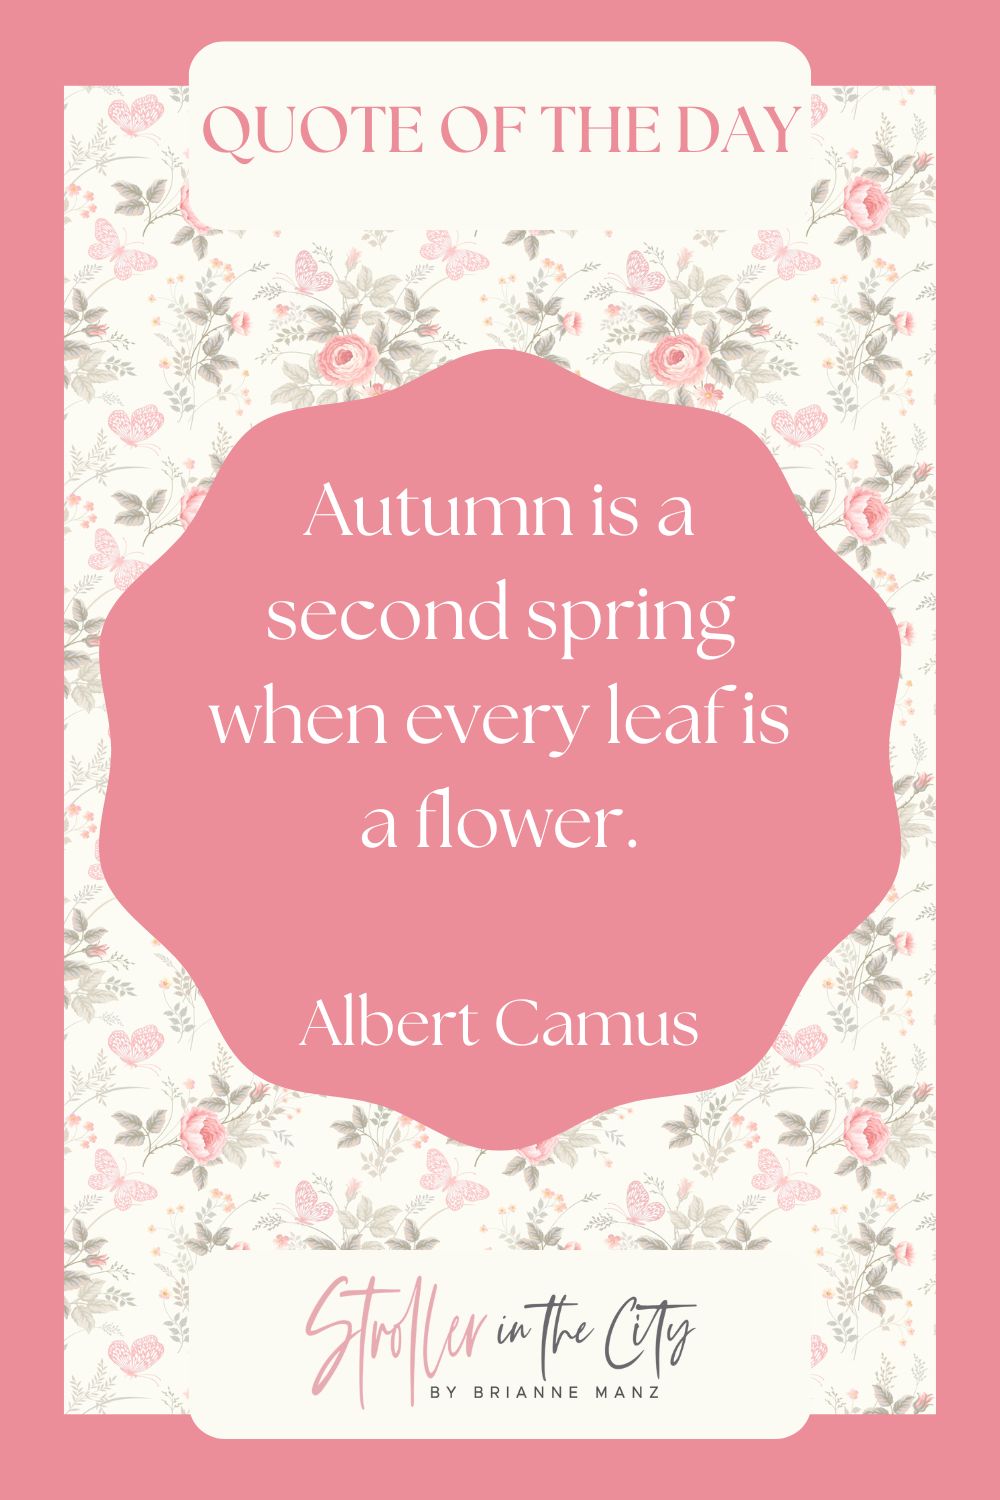 Autumn quote text:/ Autumn is a second spring when every leaf is a flower